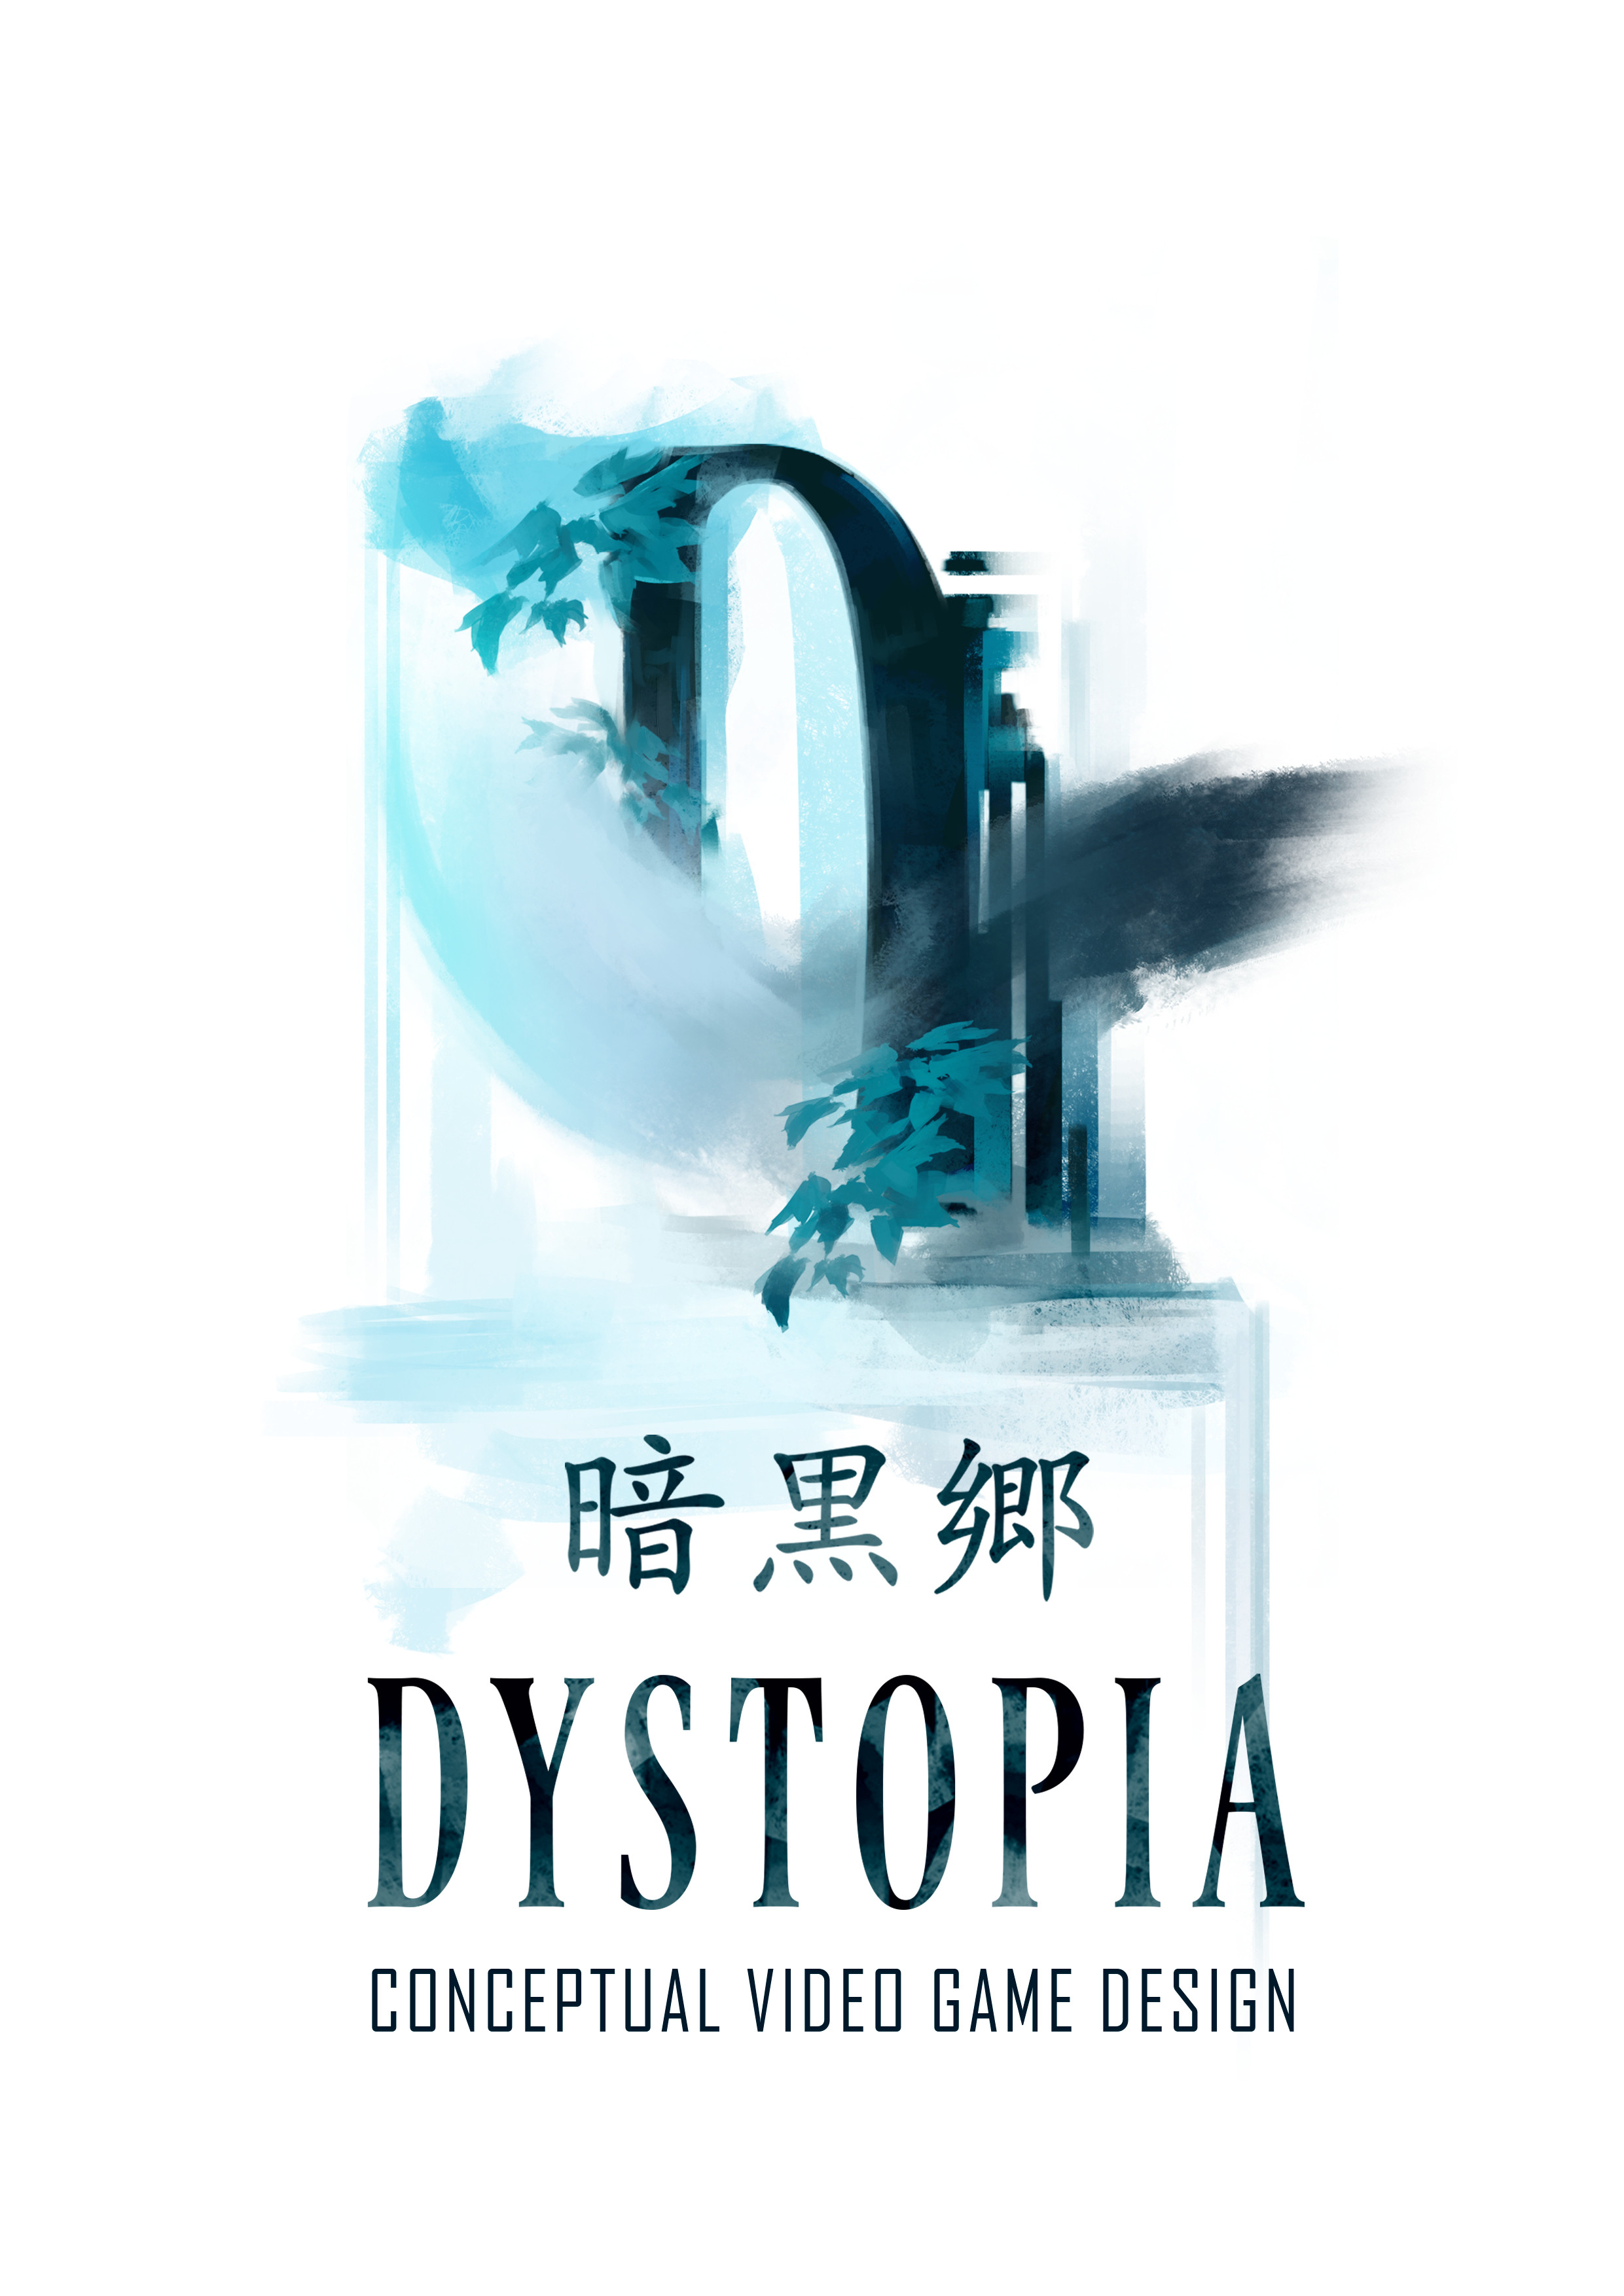 Video game concept "Dystopia", 2020. Personal project.